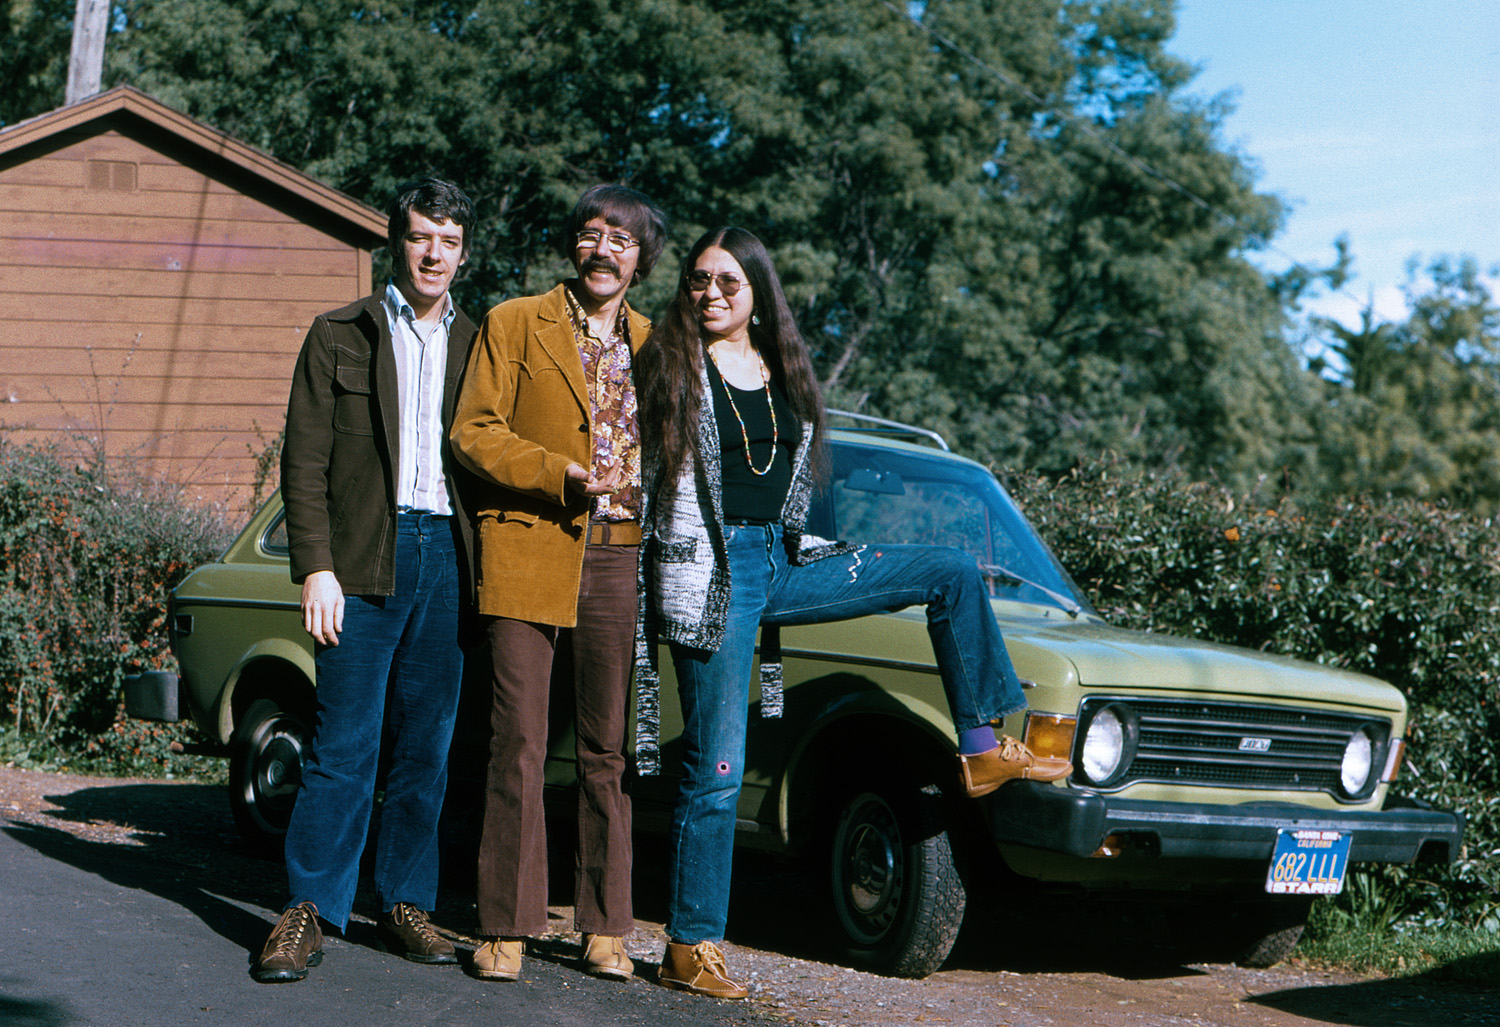 Another mirth-provoking look at the clothing, footwear and vehicle choices of the 70s, just a bit down the street from a similar scene three years earlier. This time, in January 1974, I join my brother and sister-in-law in a pose by their now different green foreign car, a Fiat station wagon. I'll leave it up to the chorus of commenters as to whether the various changes overall represent progress or regression. I'll only say that once again, my sister-in-law is the most stylish. Kodachrome 64 slide from my brother's camera. View full size.